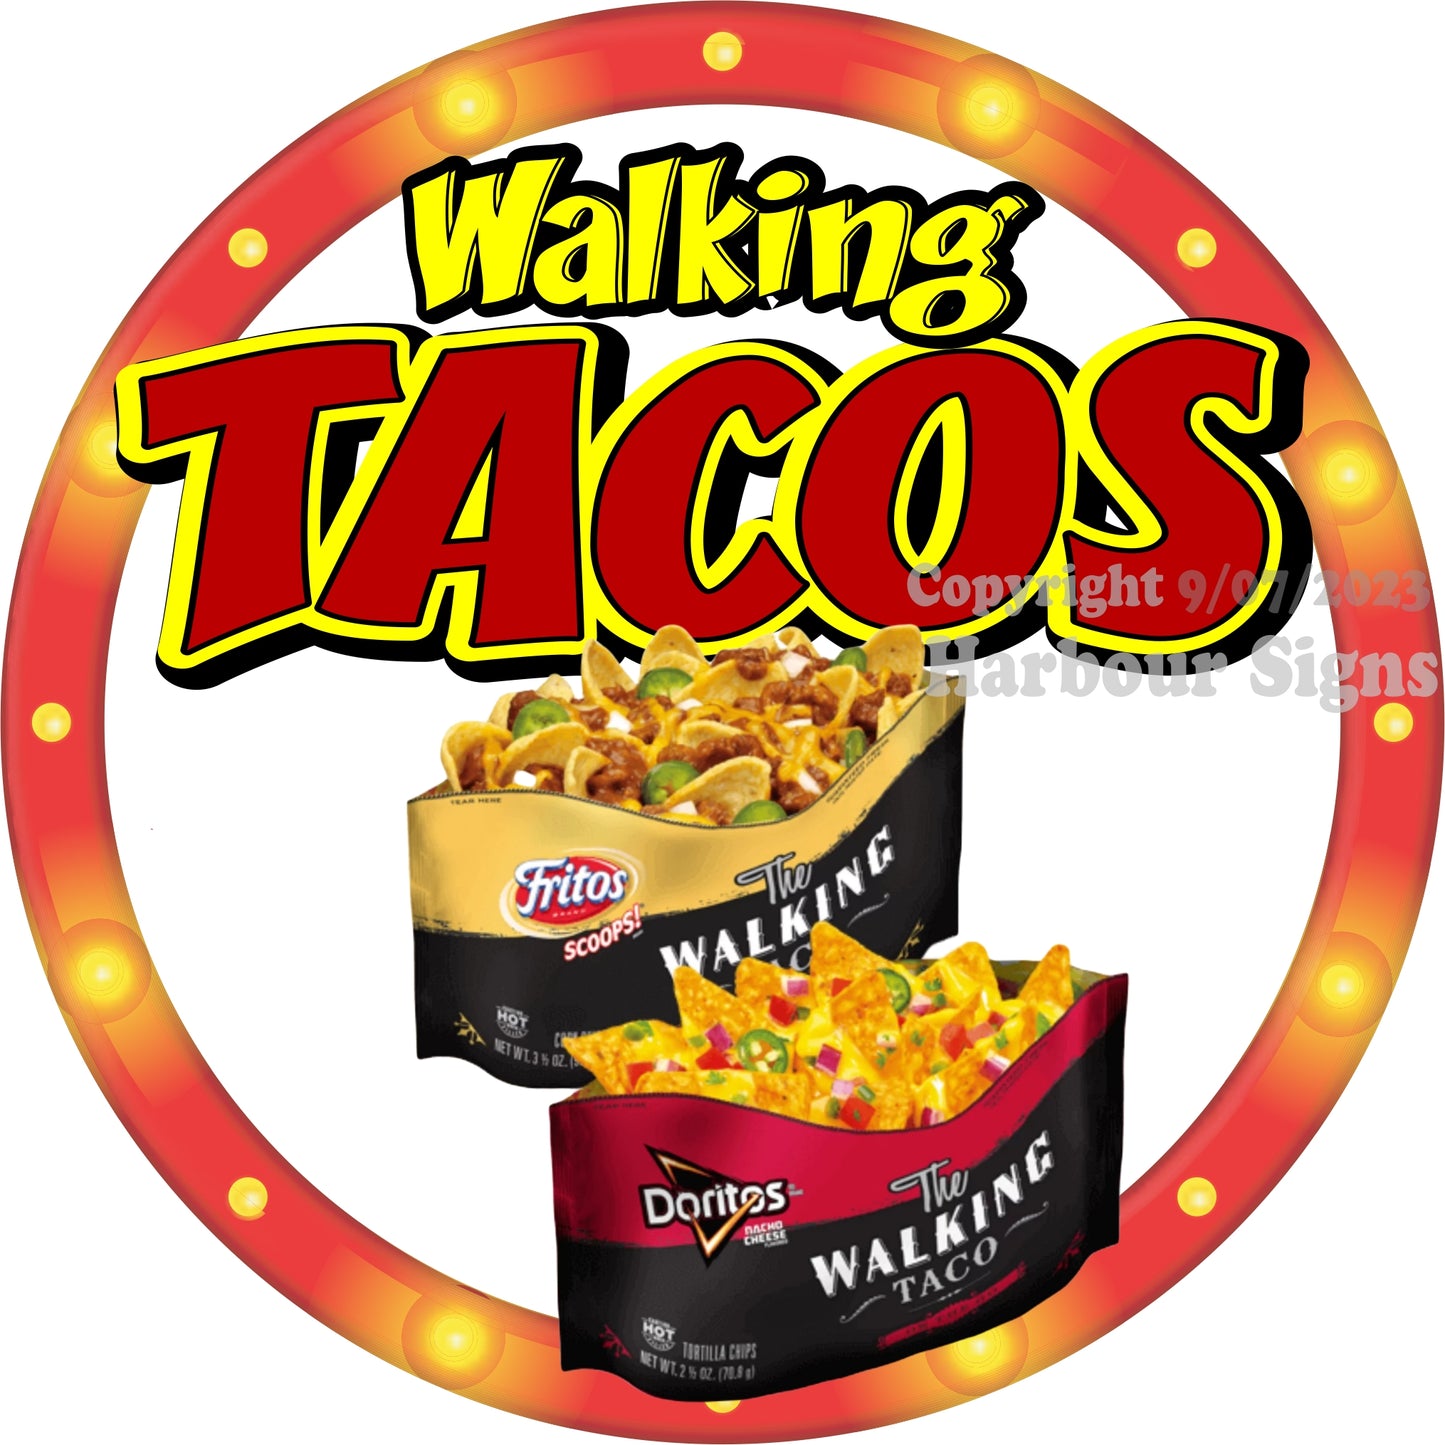 Walking Tacos Decal Food Truck Concession Vinyl Sticker